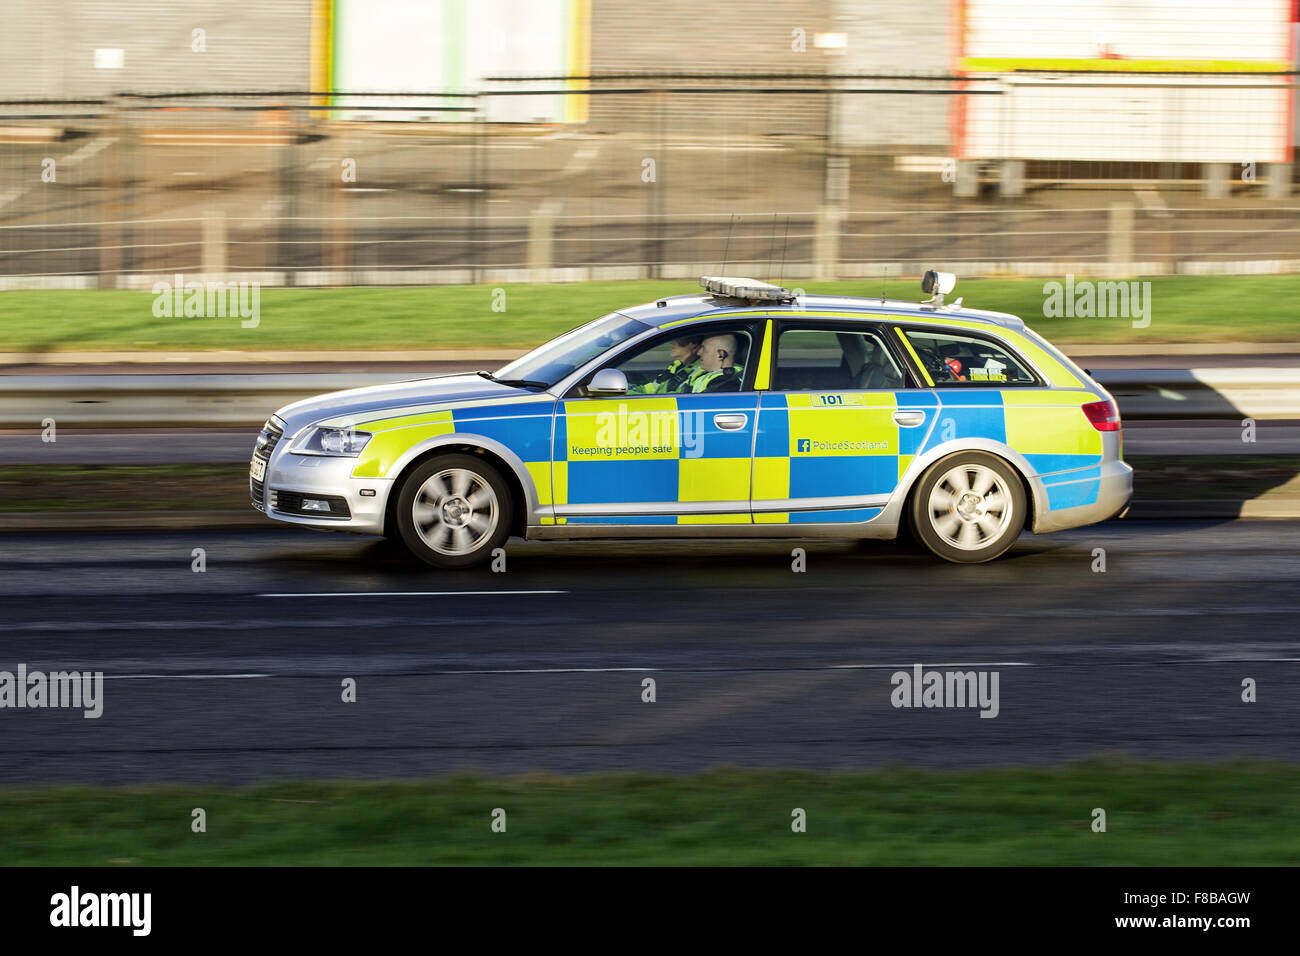 Police Scotland Audi police car responding to an incident along the Kingsway West dual carriageway in Dundee, UK Stock Photo